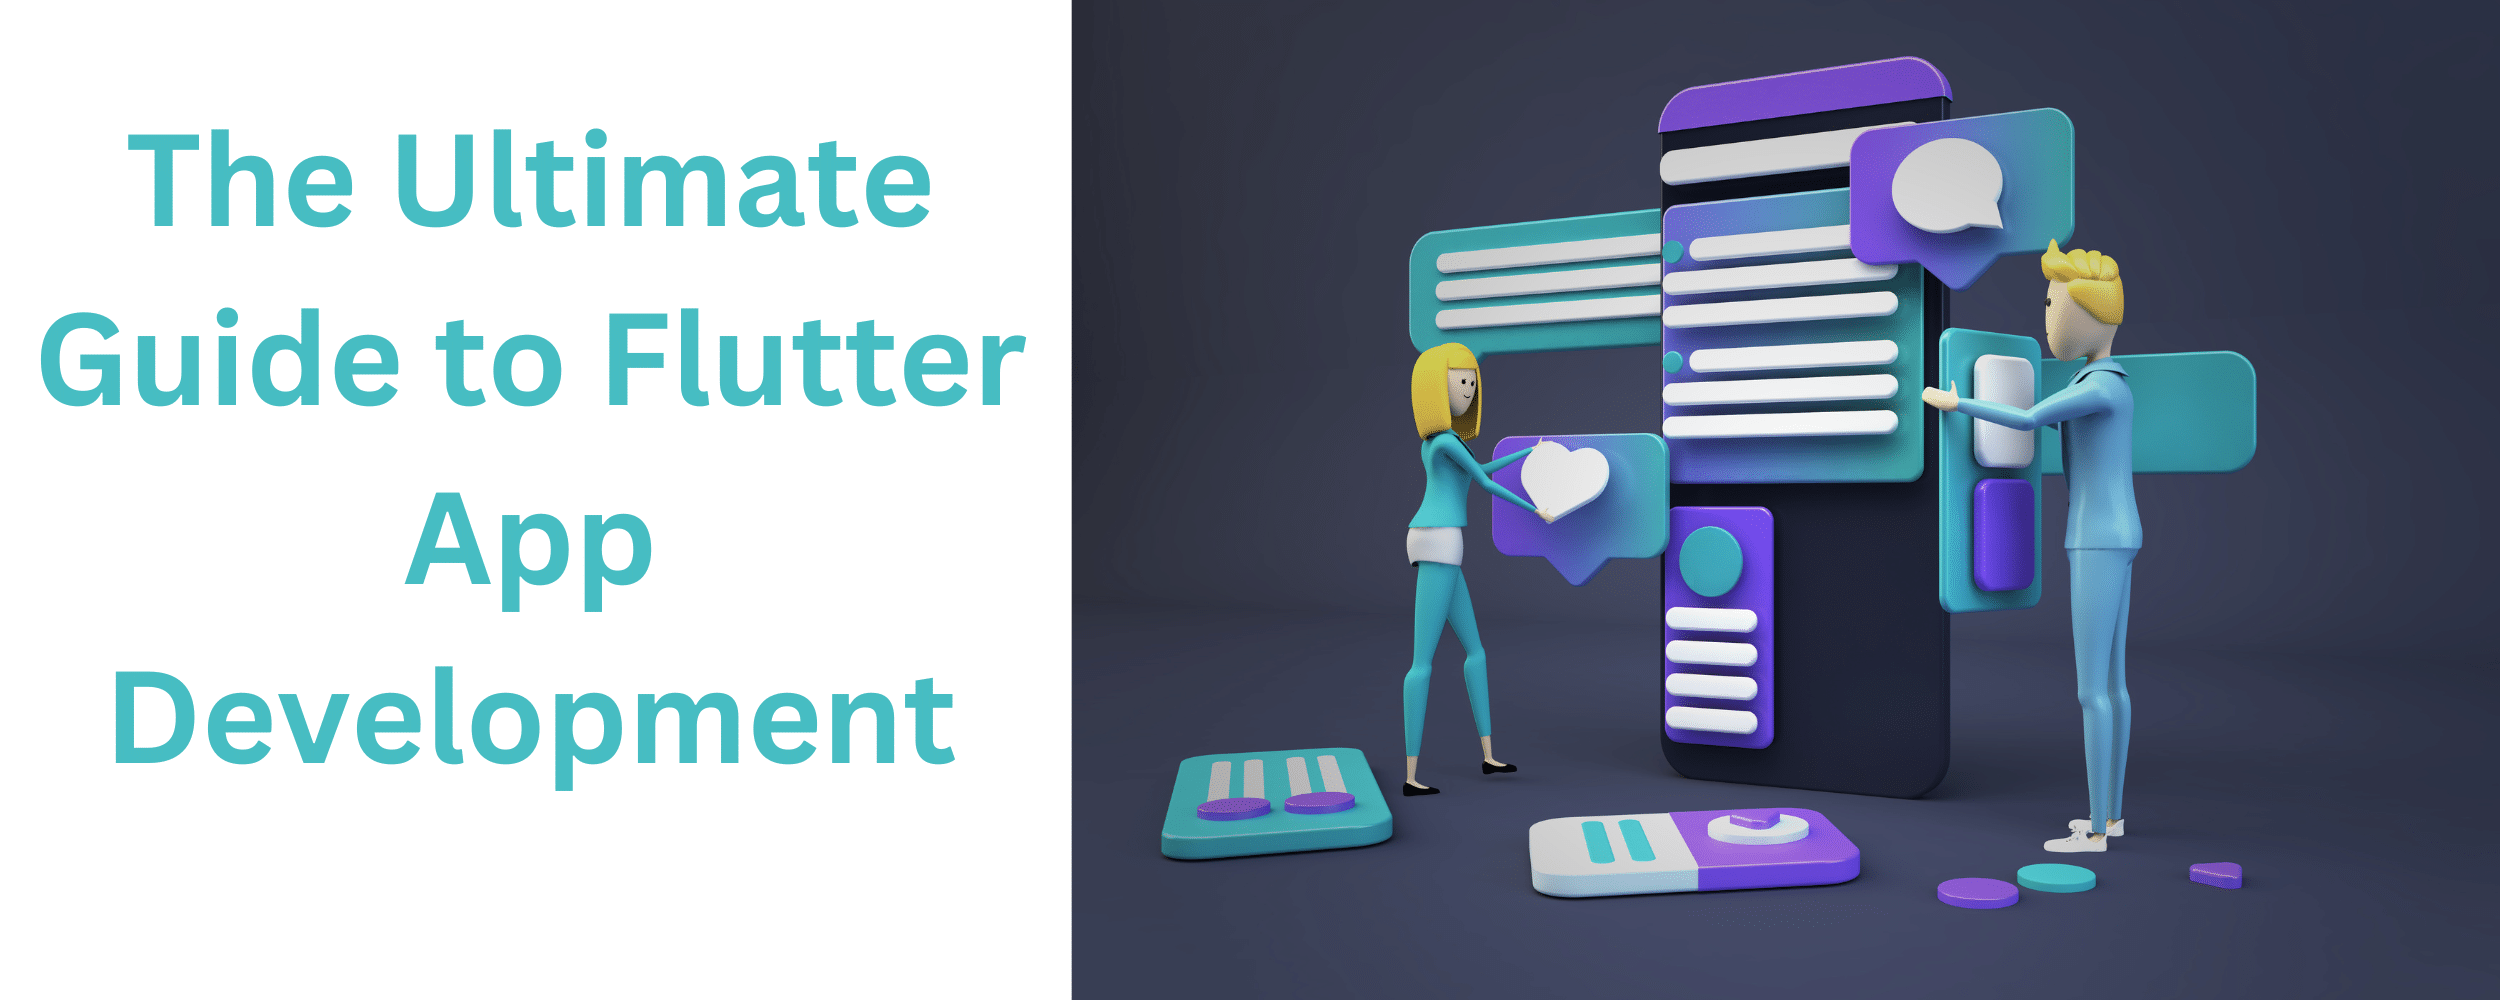 The Ultimate Guide to Flutter App Development